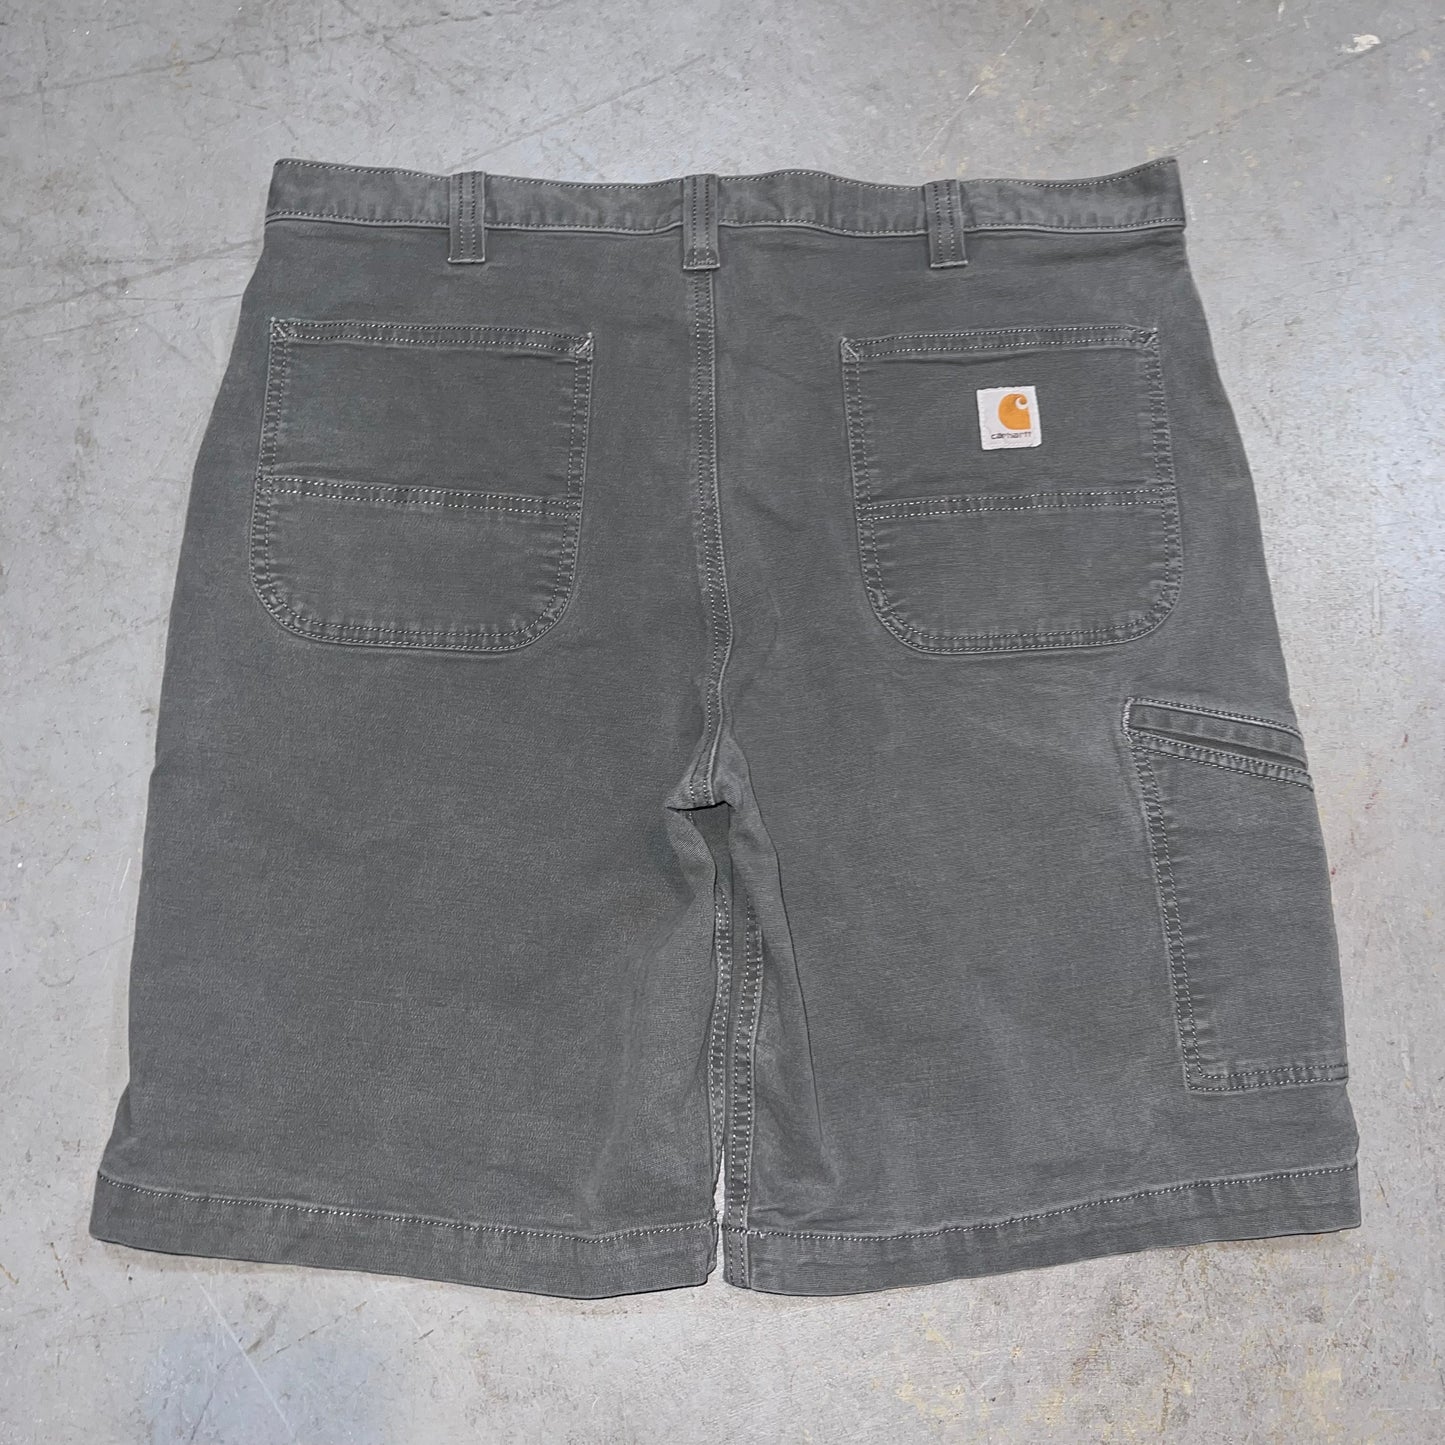 Carhartt Carpenter Relaxed Fit Shorts. Size 38